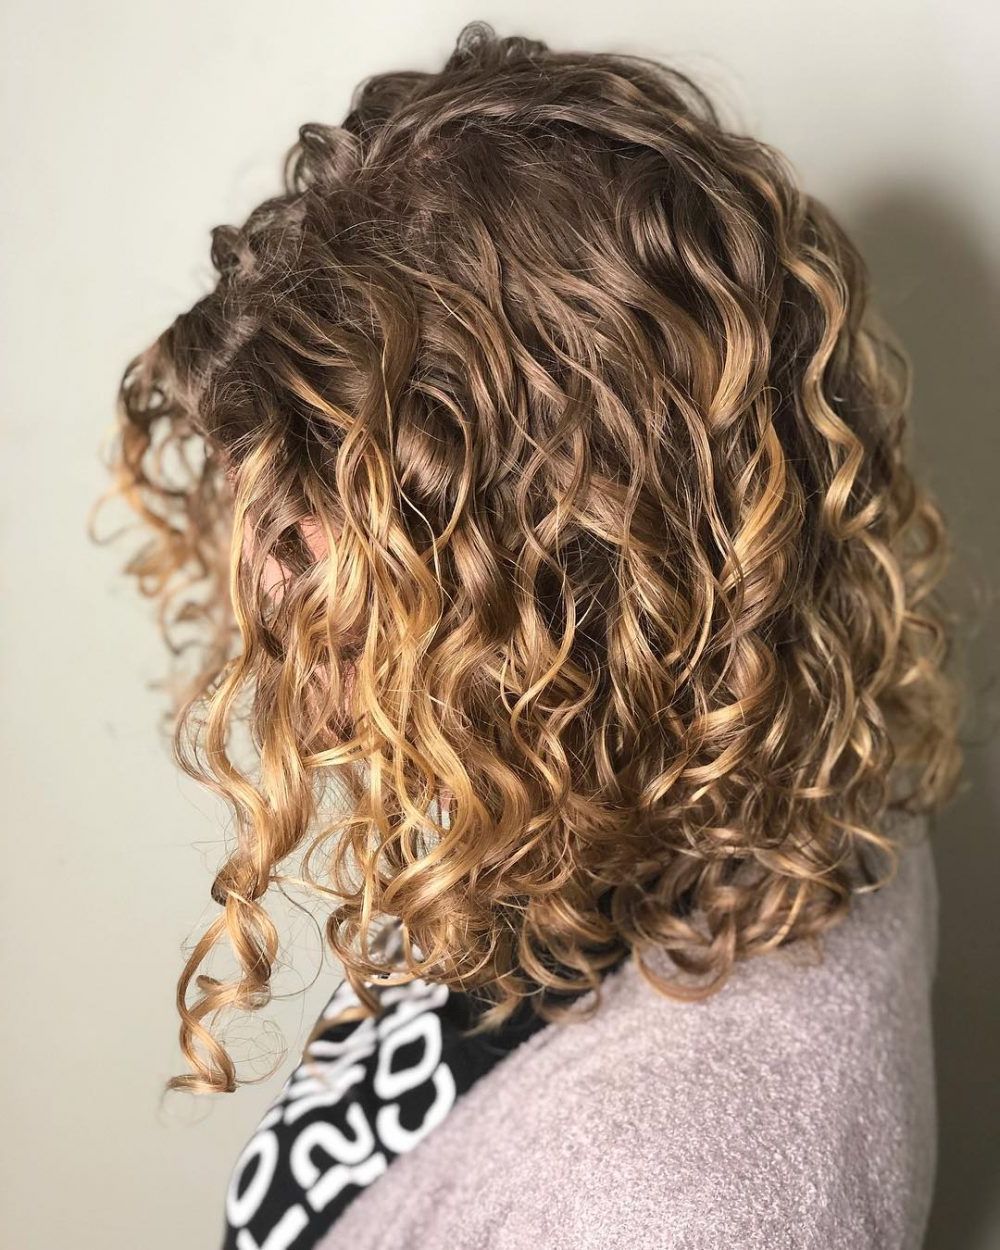 30 Gorgeous Medium Length Curly Hairstyles For Women In 2018 With Casual Scrunched Hairstyles For Short Curly Hair (View 8 of 20)